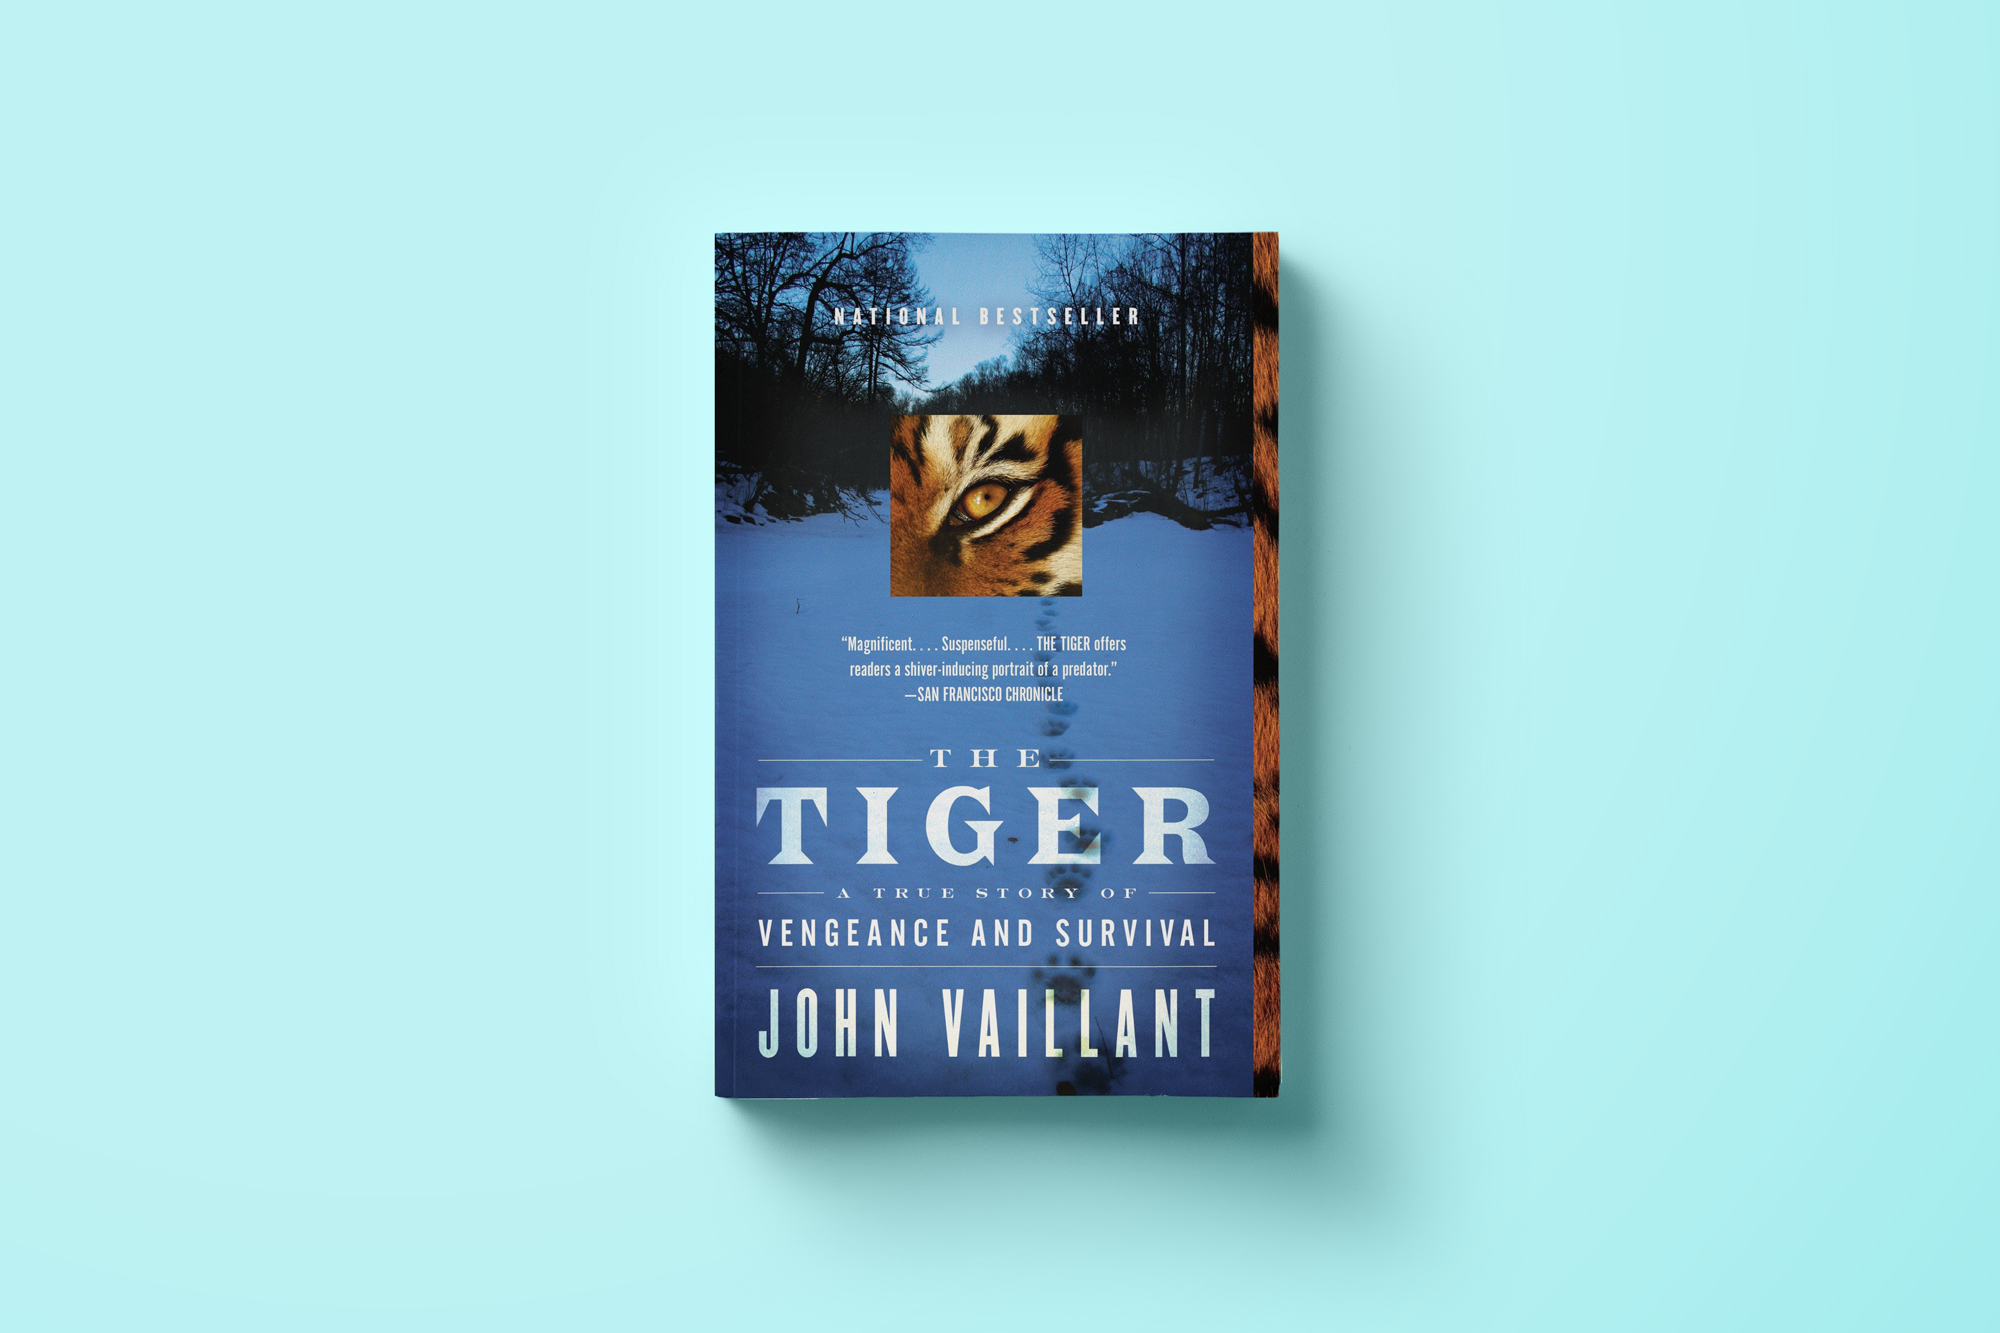 the tiger a story of vengeance and survival